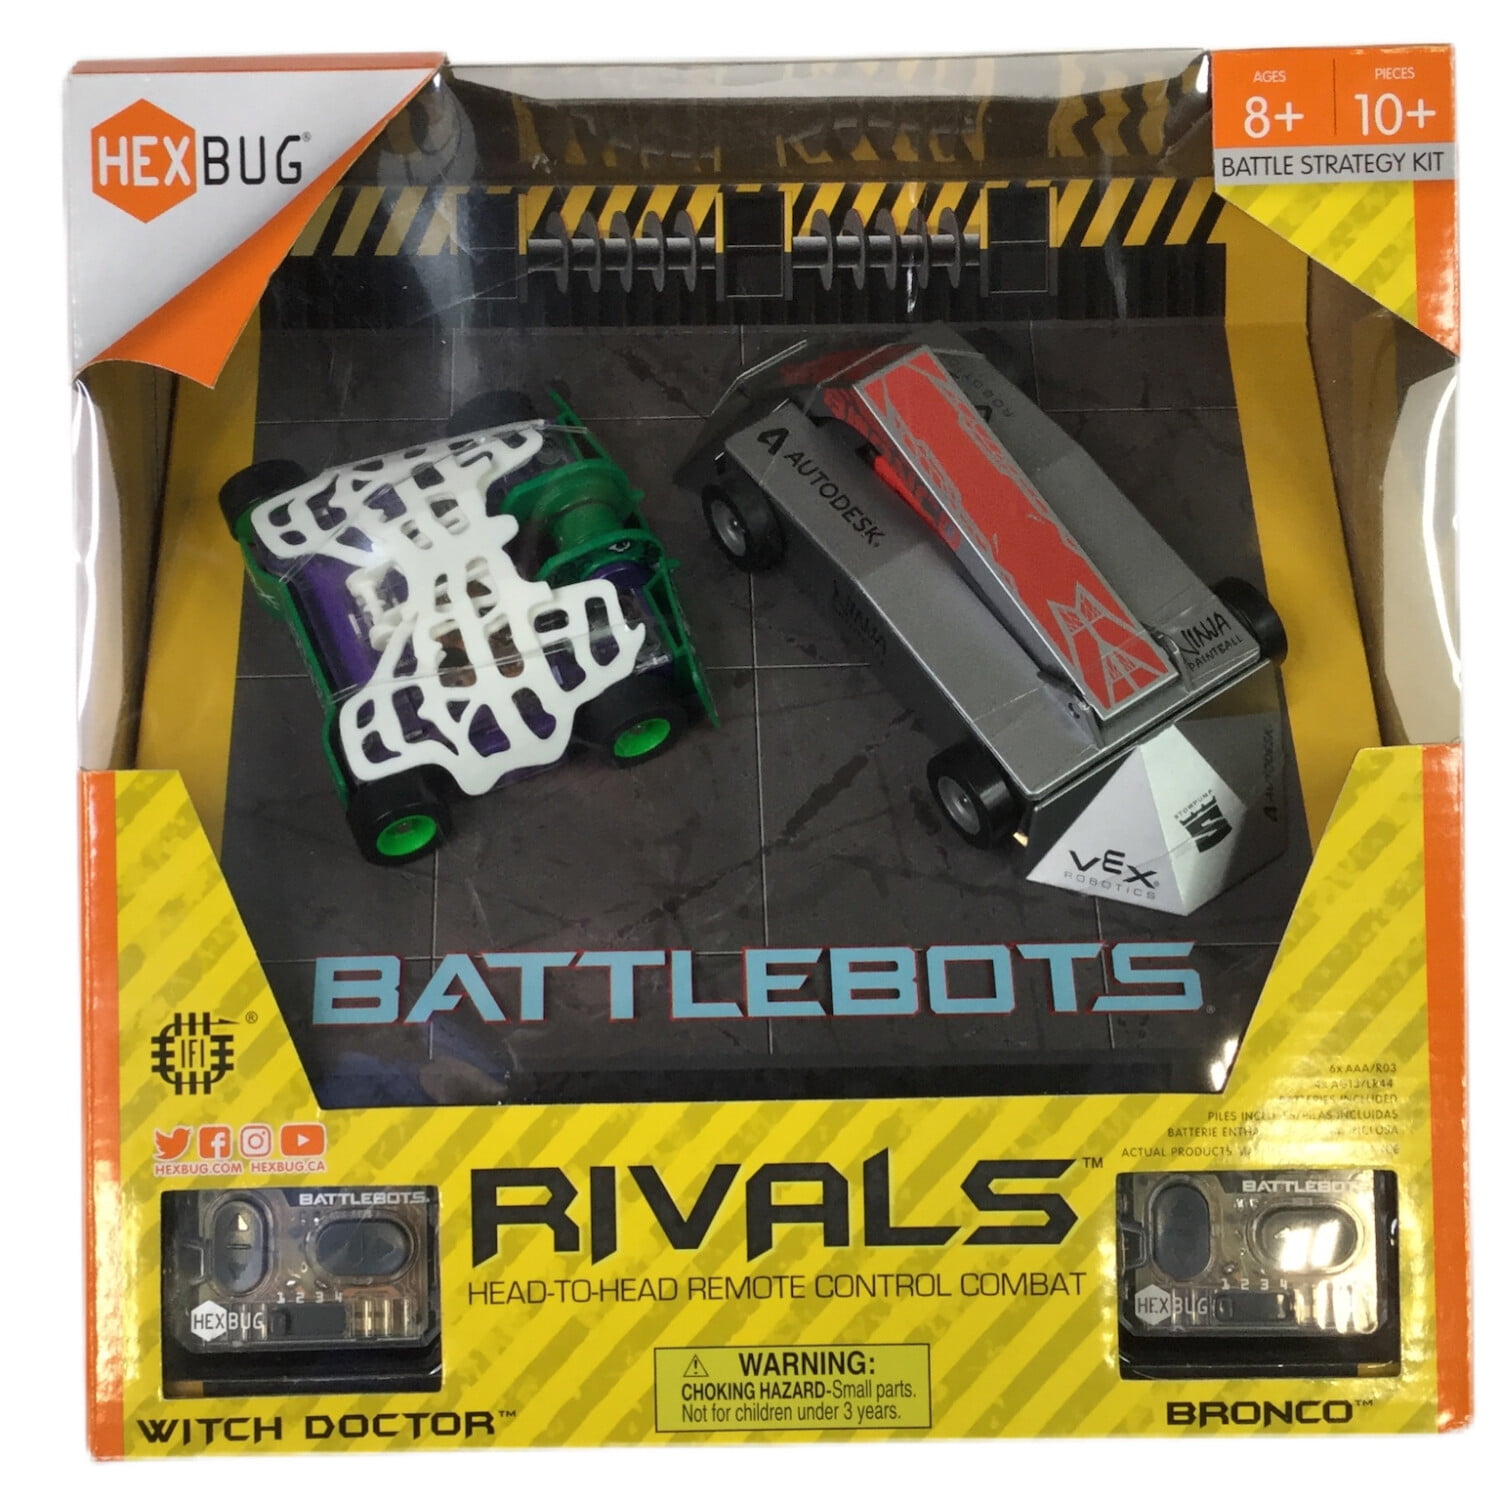 HEXBUG Battlebots Build Your Own Bot Head-to-Head Remote Control Combat Blue 